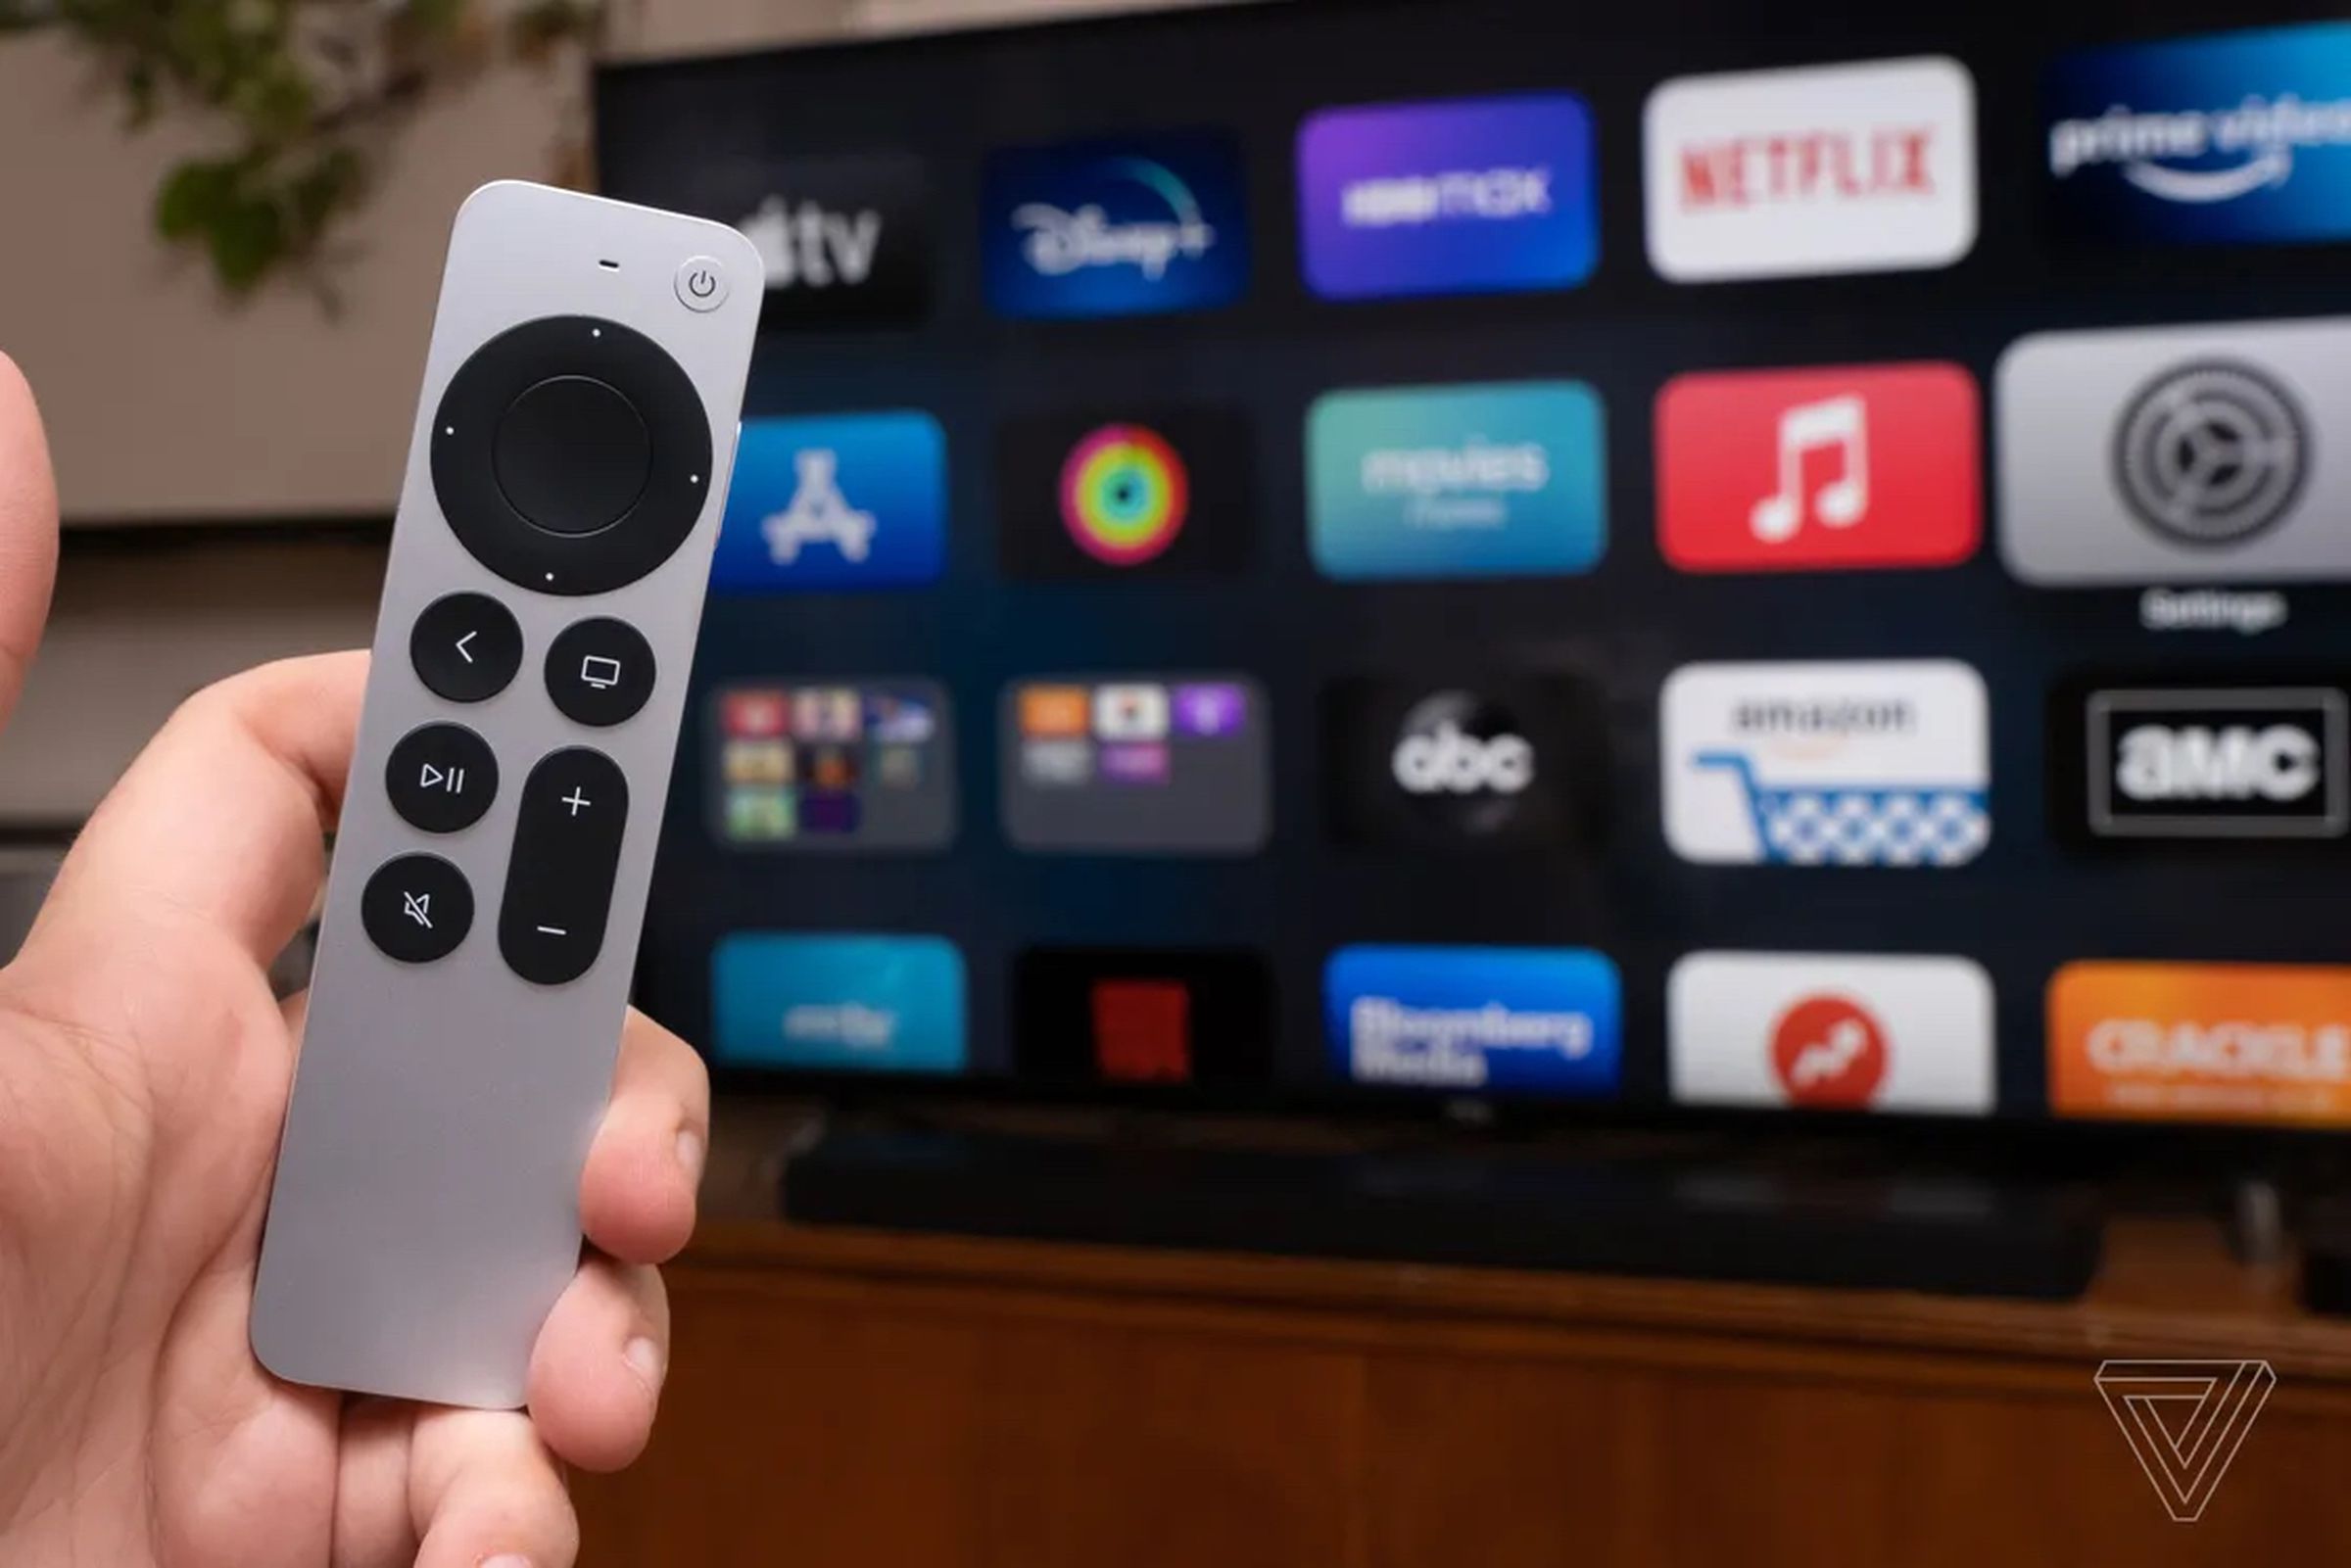 The new Siri remote for the latest Apple TV 4K was a welcome sight for those with sore hands who desire physical buttons.